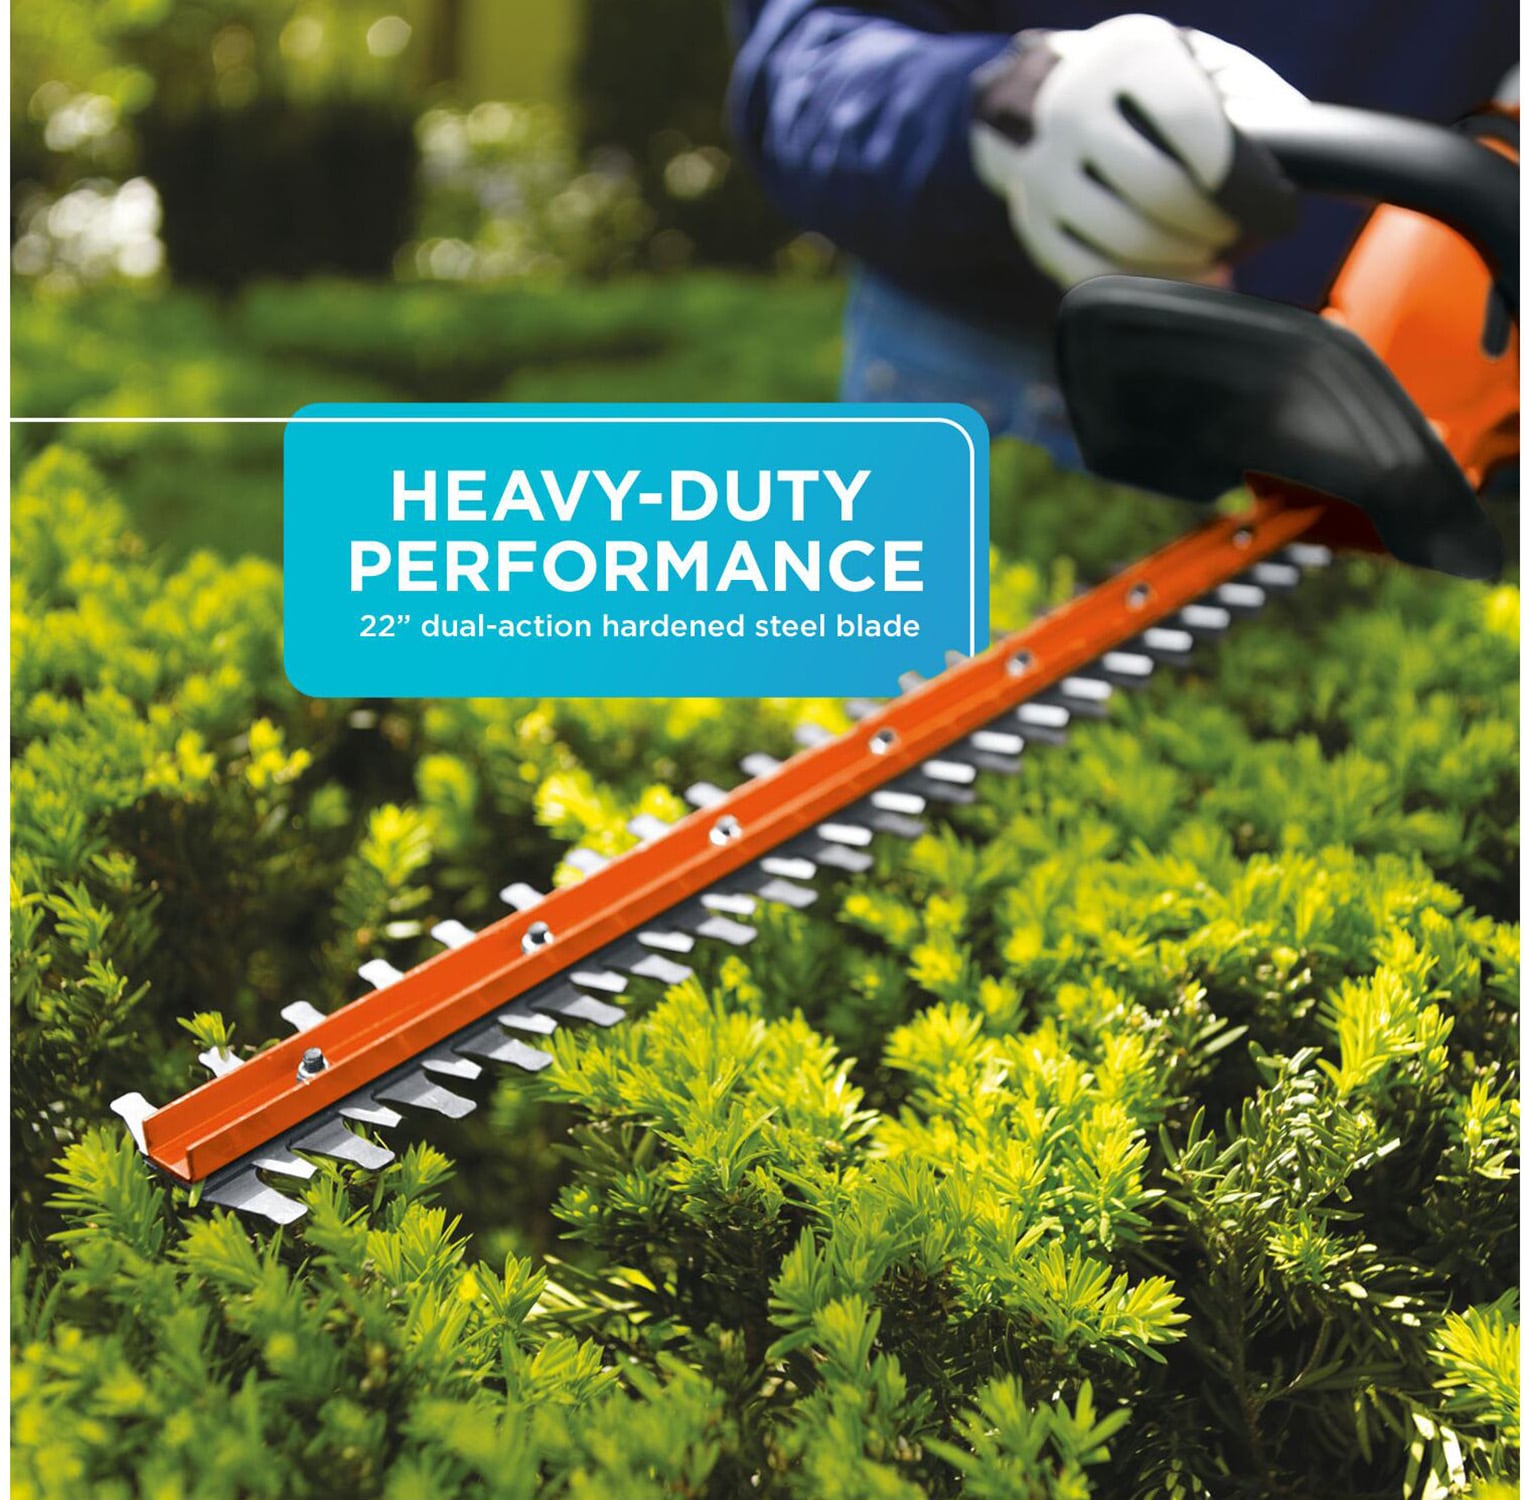 BLACK+DECKER 20V MAX Cordless Hedge Trimmer with Power Command Powercut,  22-Inch (LHT321FF)